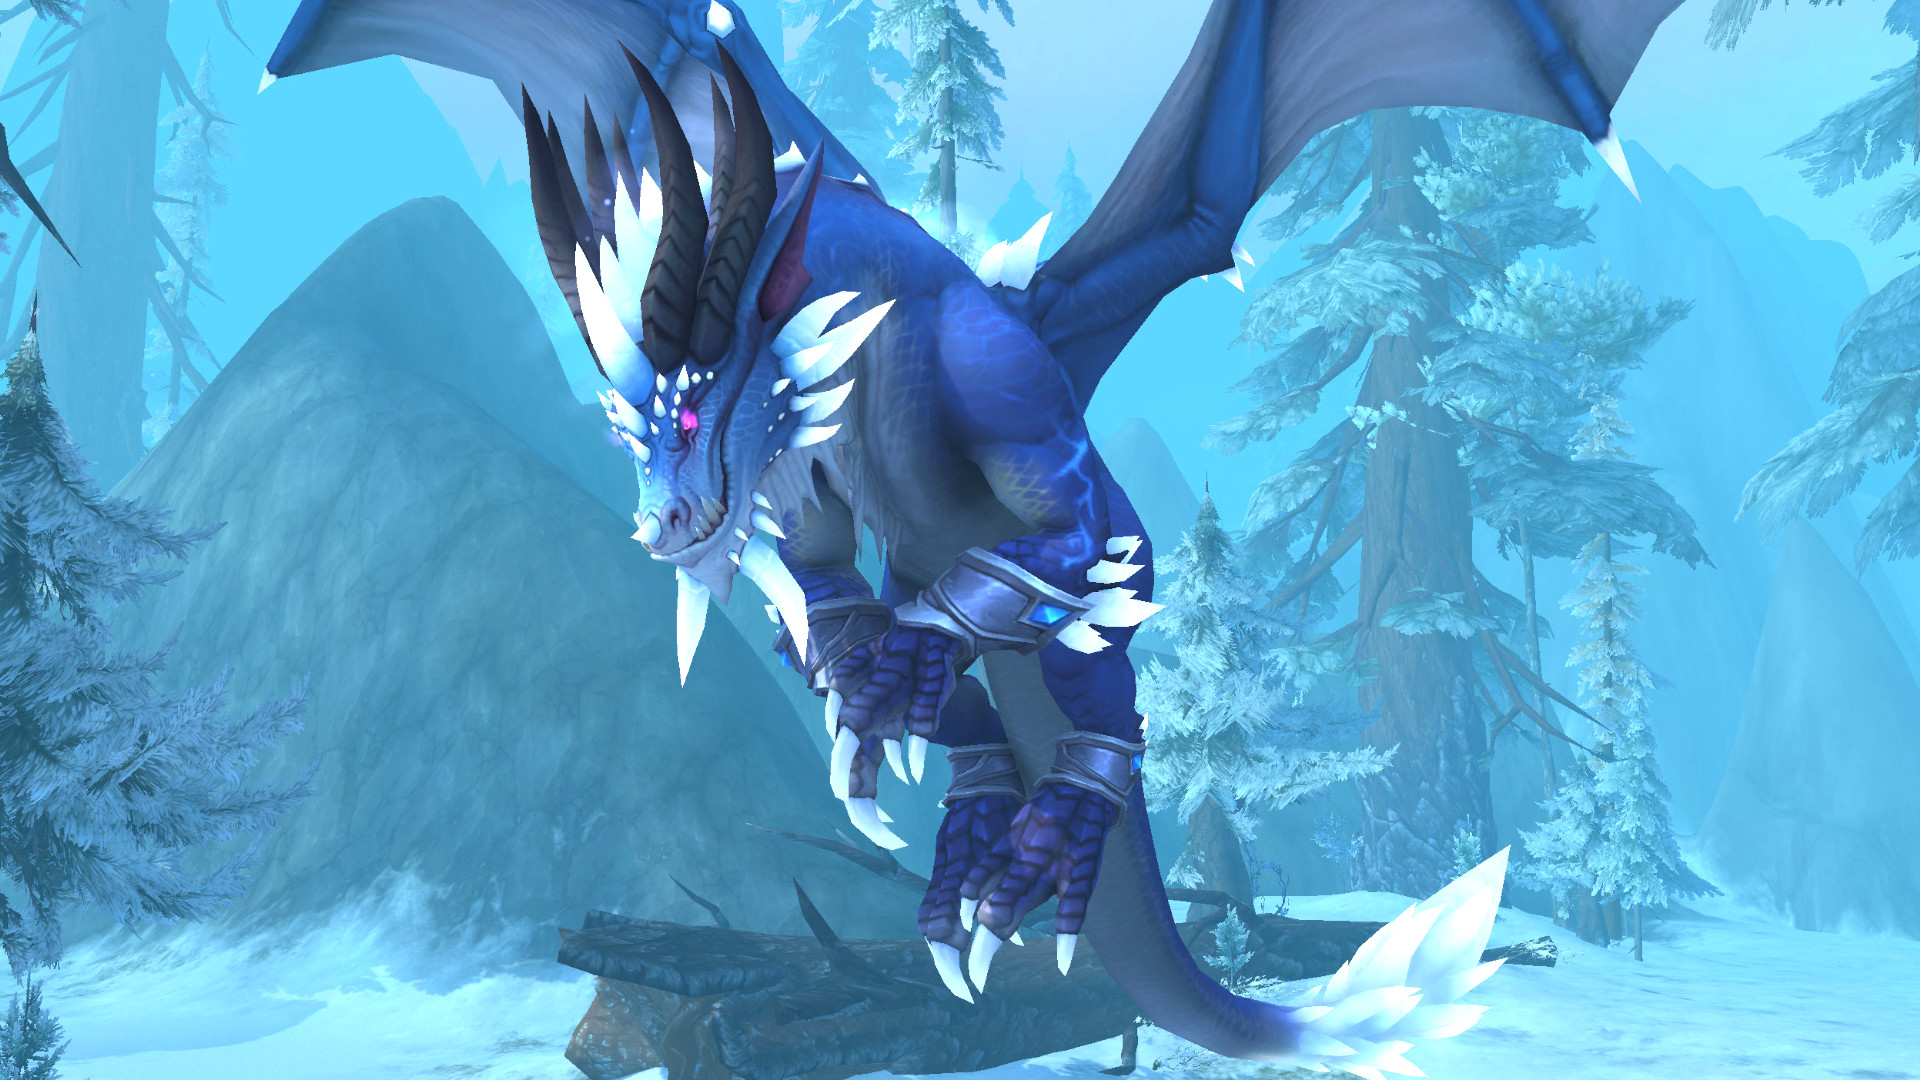 WoW: Dragonflight story won't be 